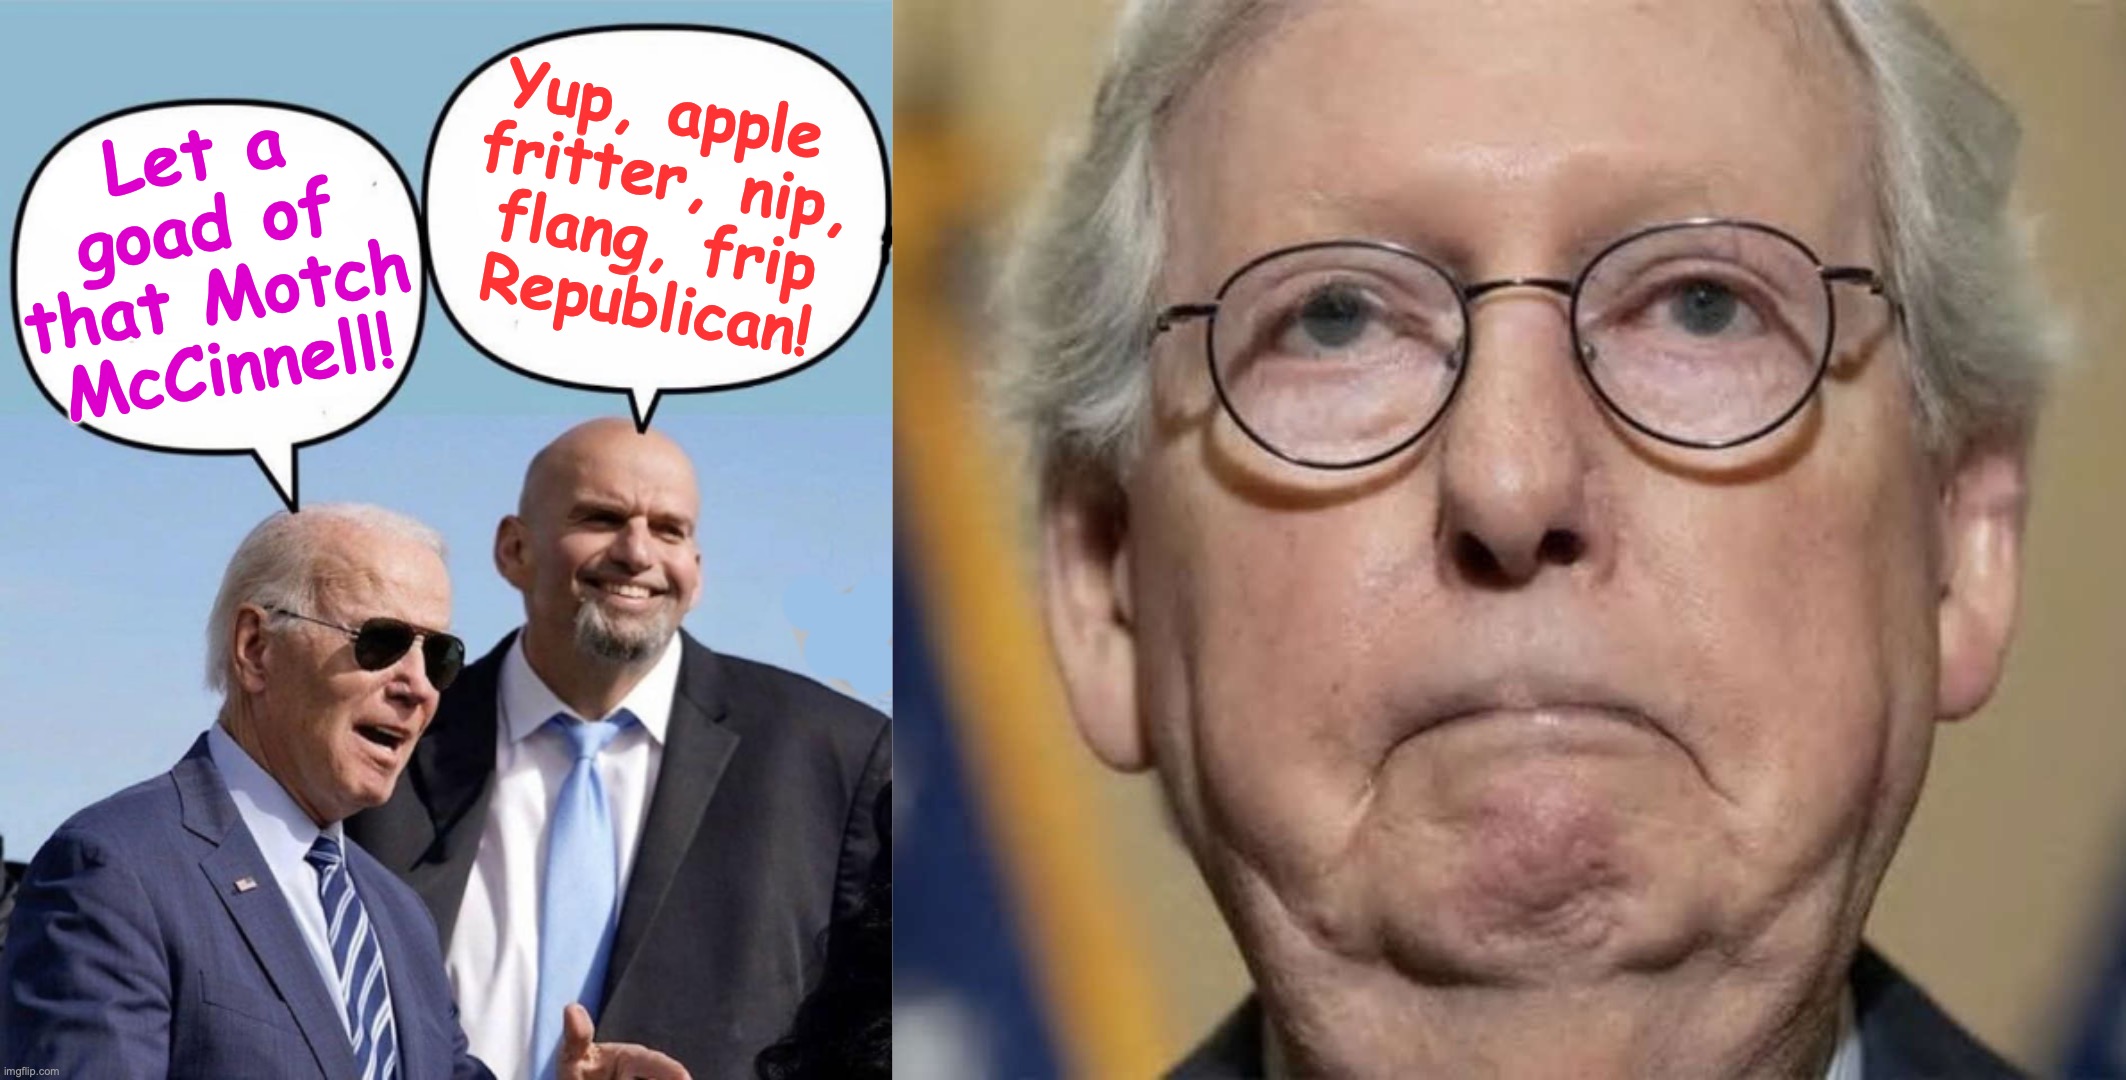 [warning: when you speak-a da same gibberish satire] | Yup, apple
 fritter, nip,
 flang, frip
 Republican! Let a goad of that Motch McCinnell! | image tagged in biden and fetterman,resting mitch face | made w/ Imgflip meme maker